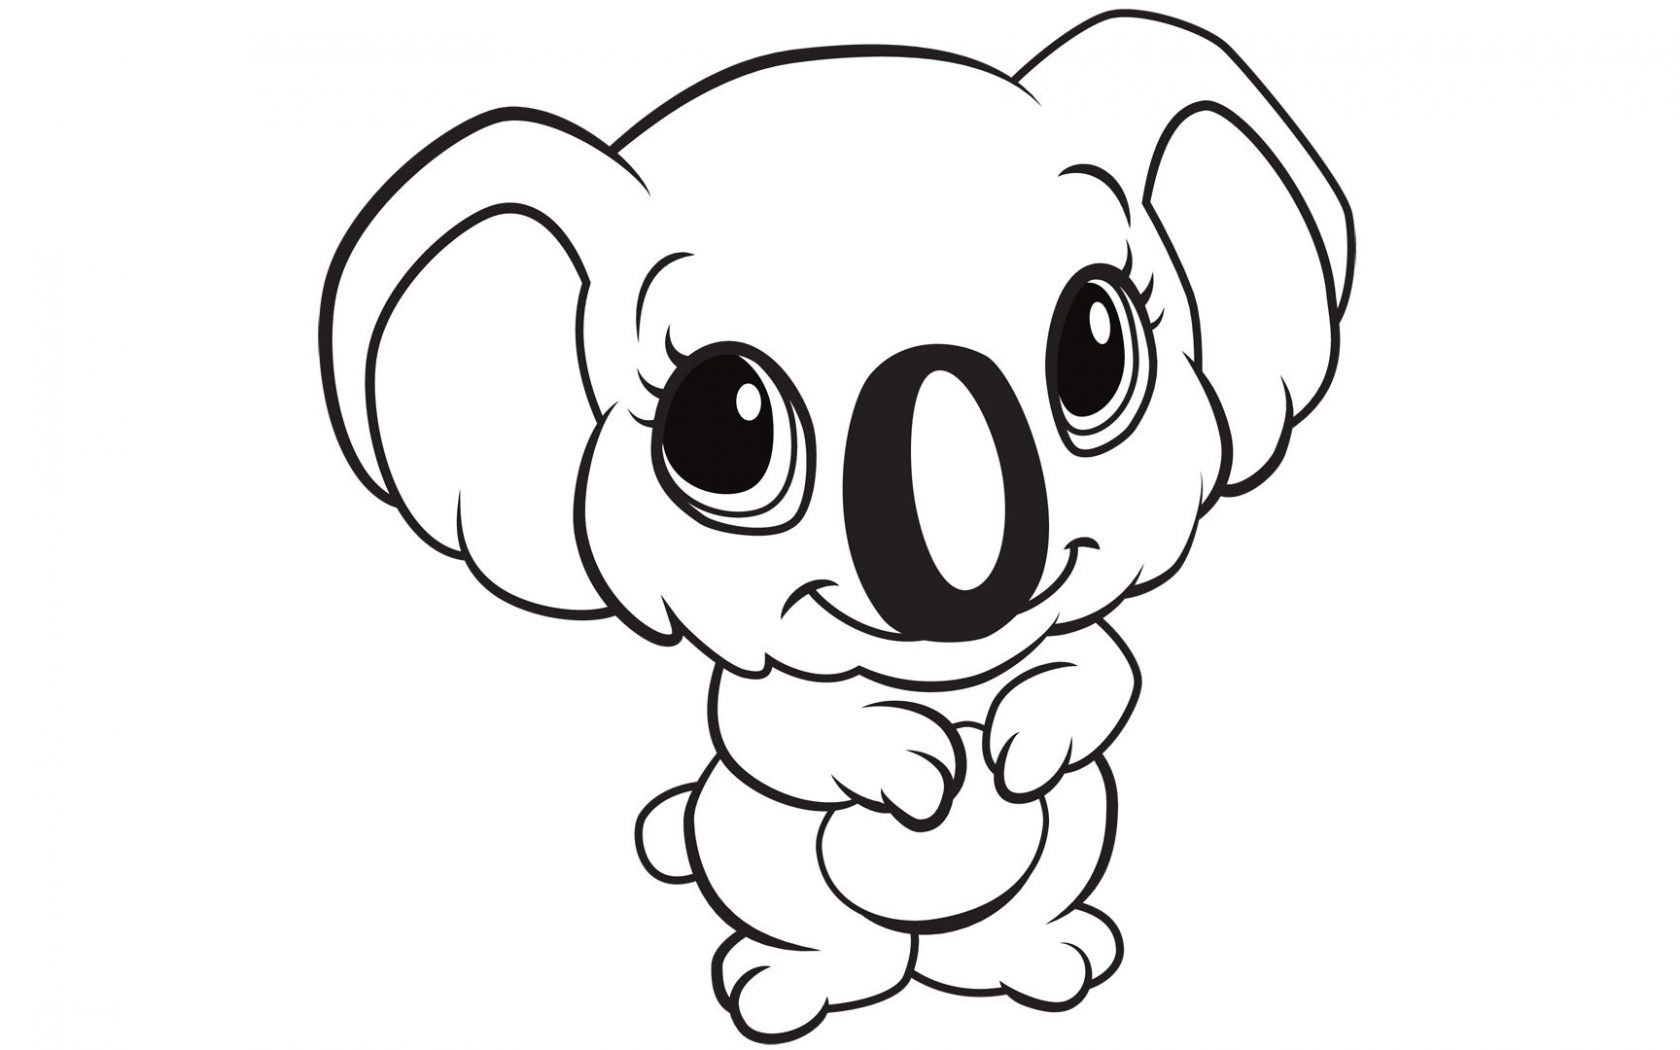 Animals Coloring Pages For Kids
 Animal Coloring Pages Best Coloring Pages For Kids